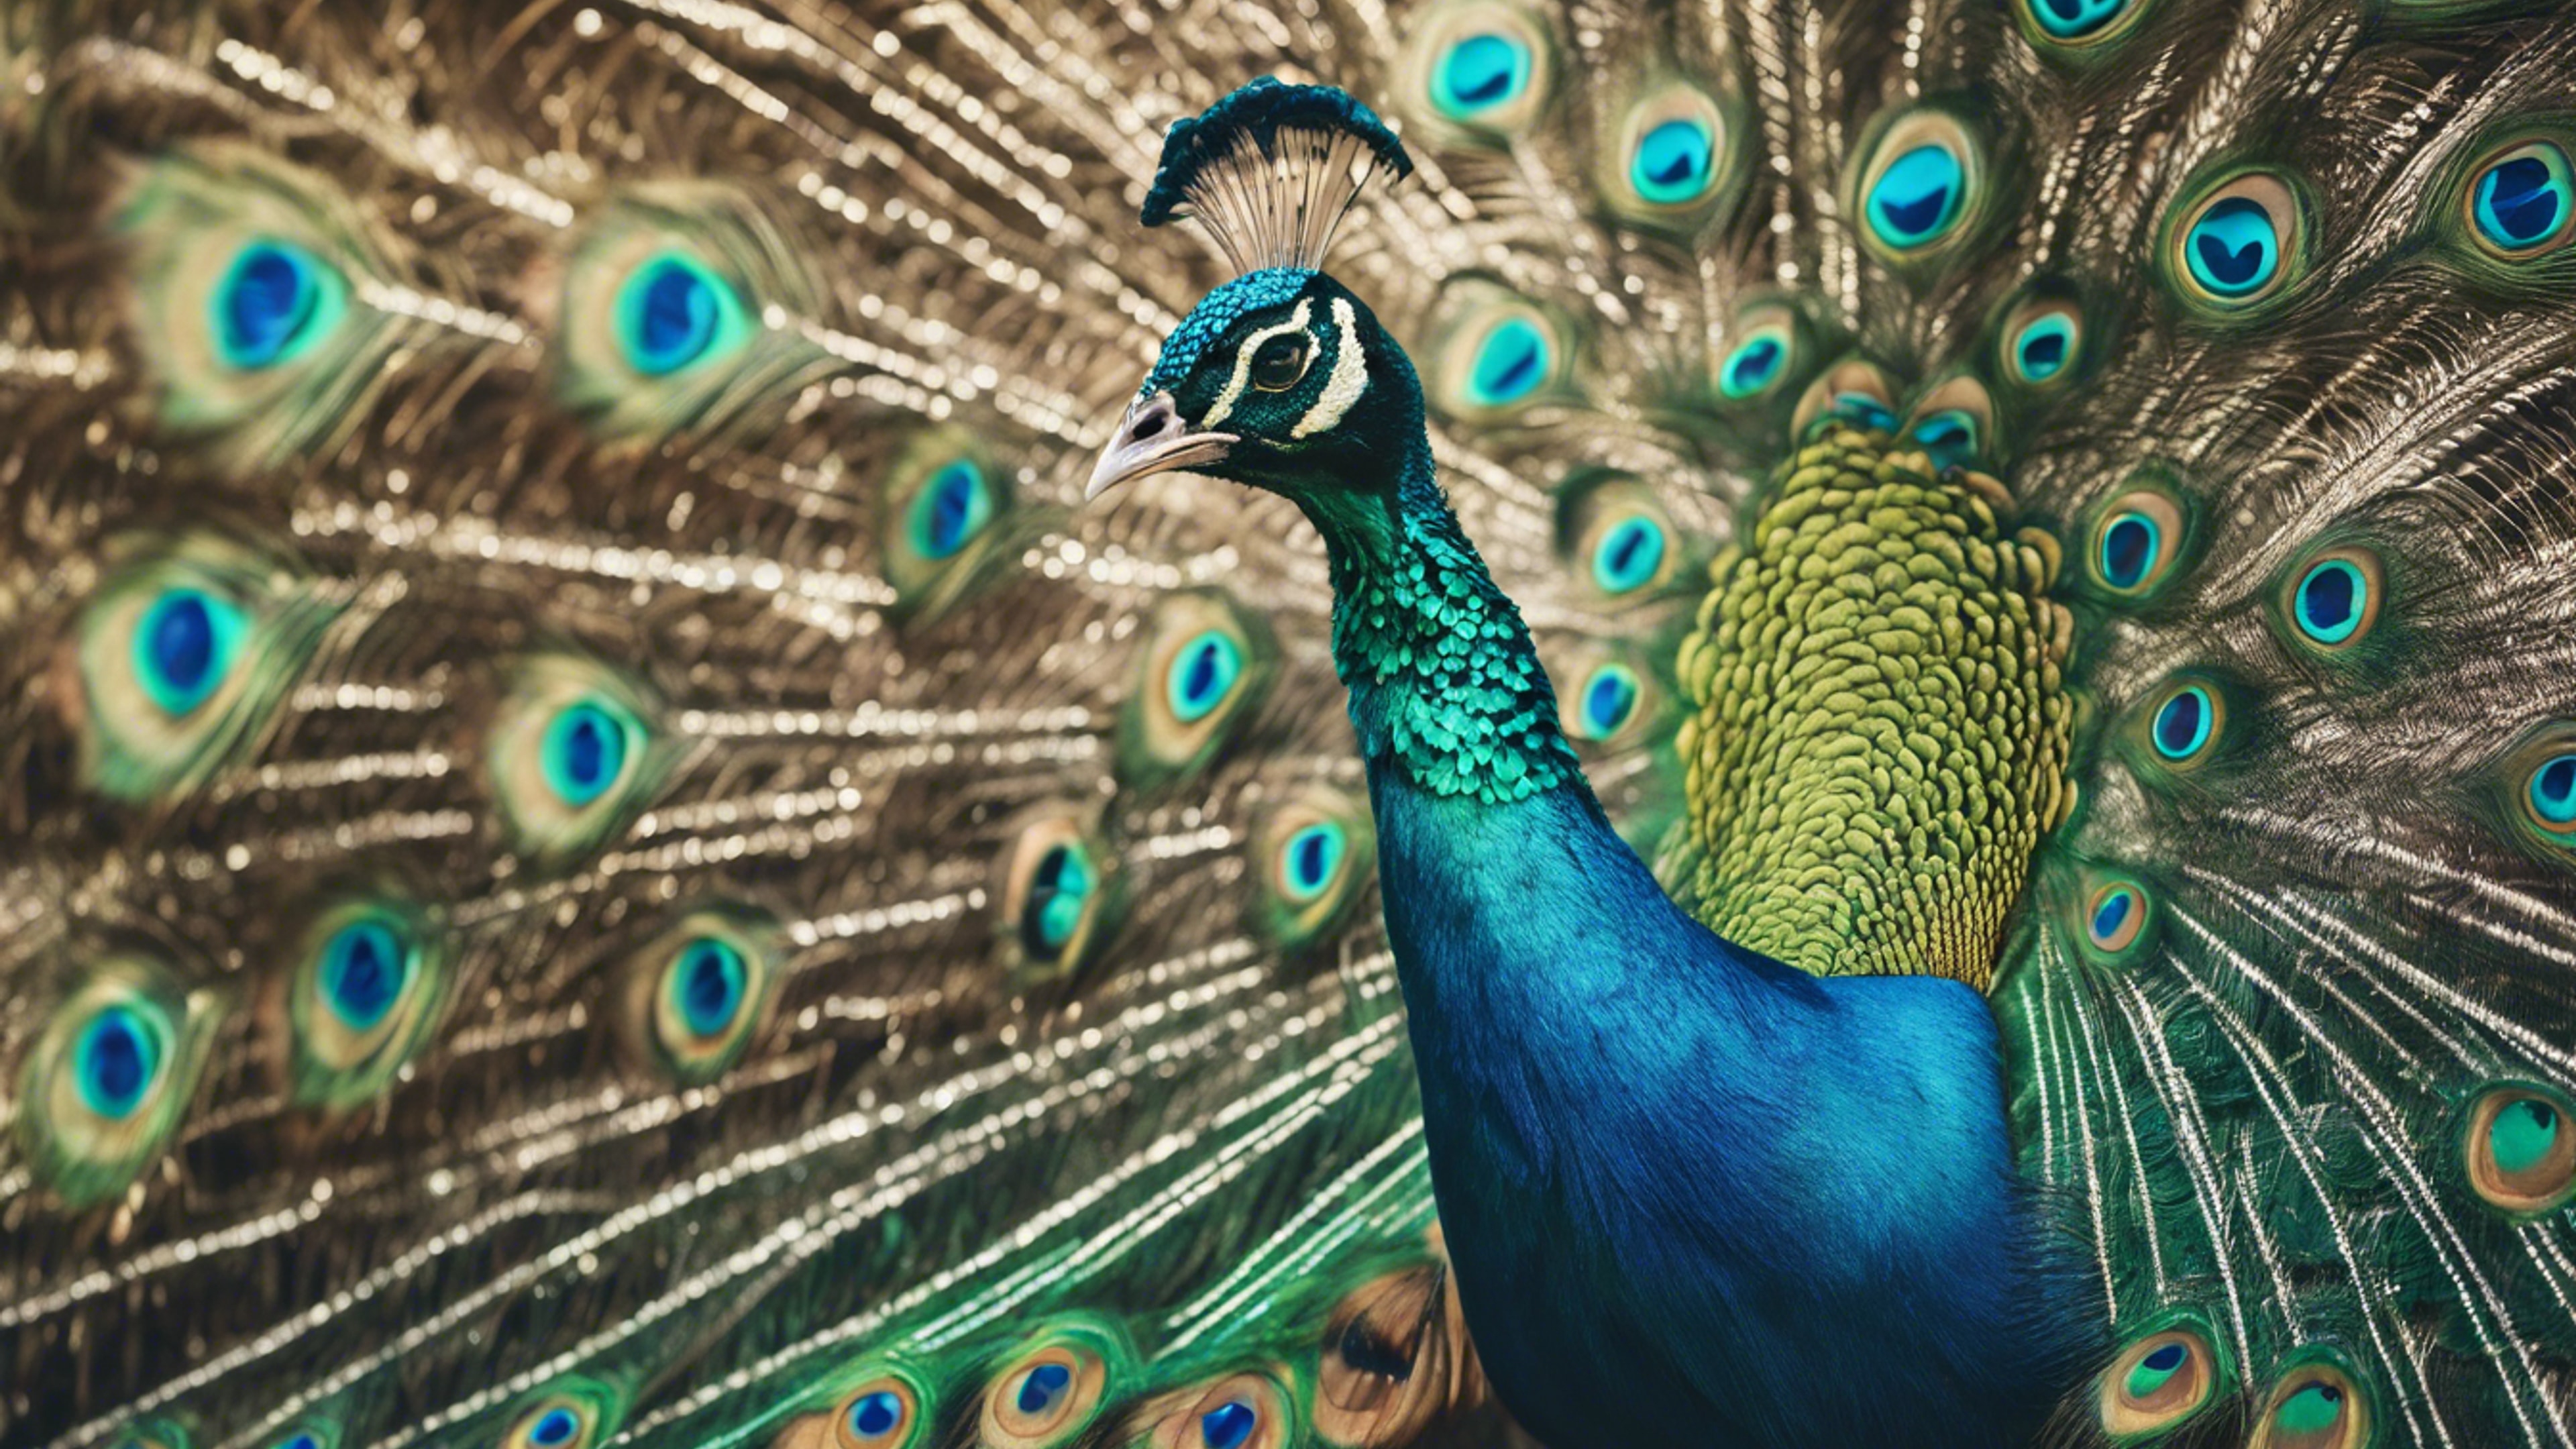 A proudly standing peacock showing off its cool teal plumage. Tapeta[c03cd8acf17648f0a47e]